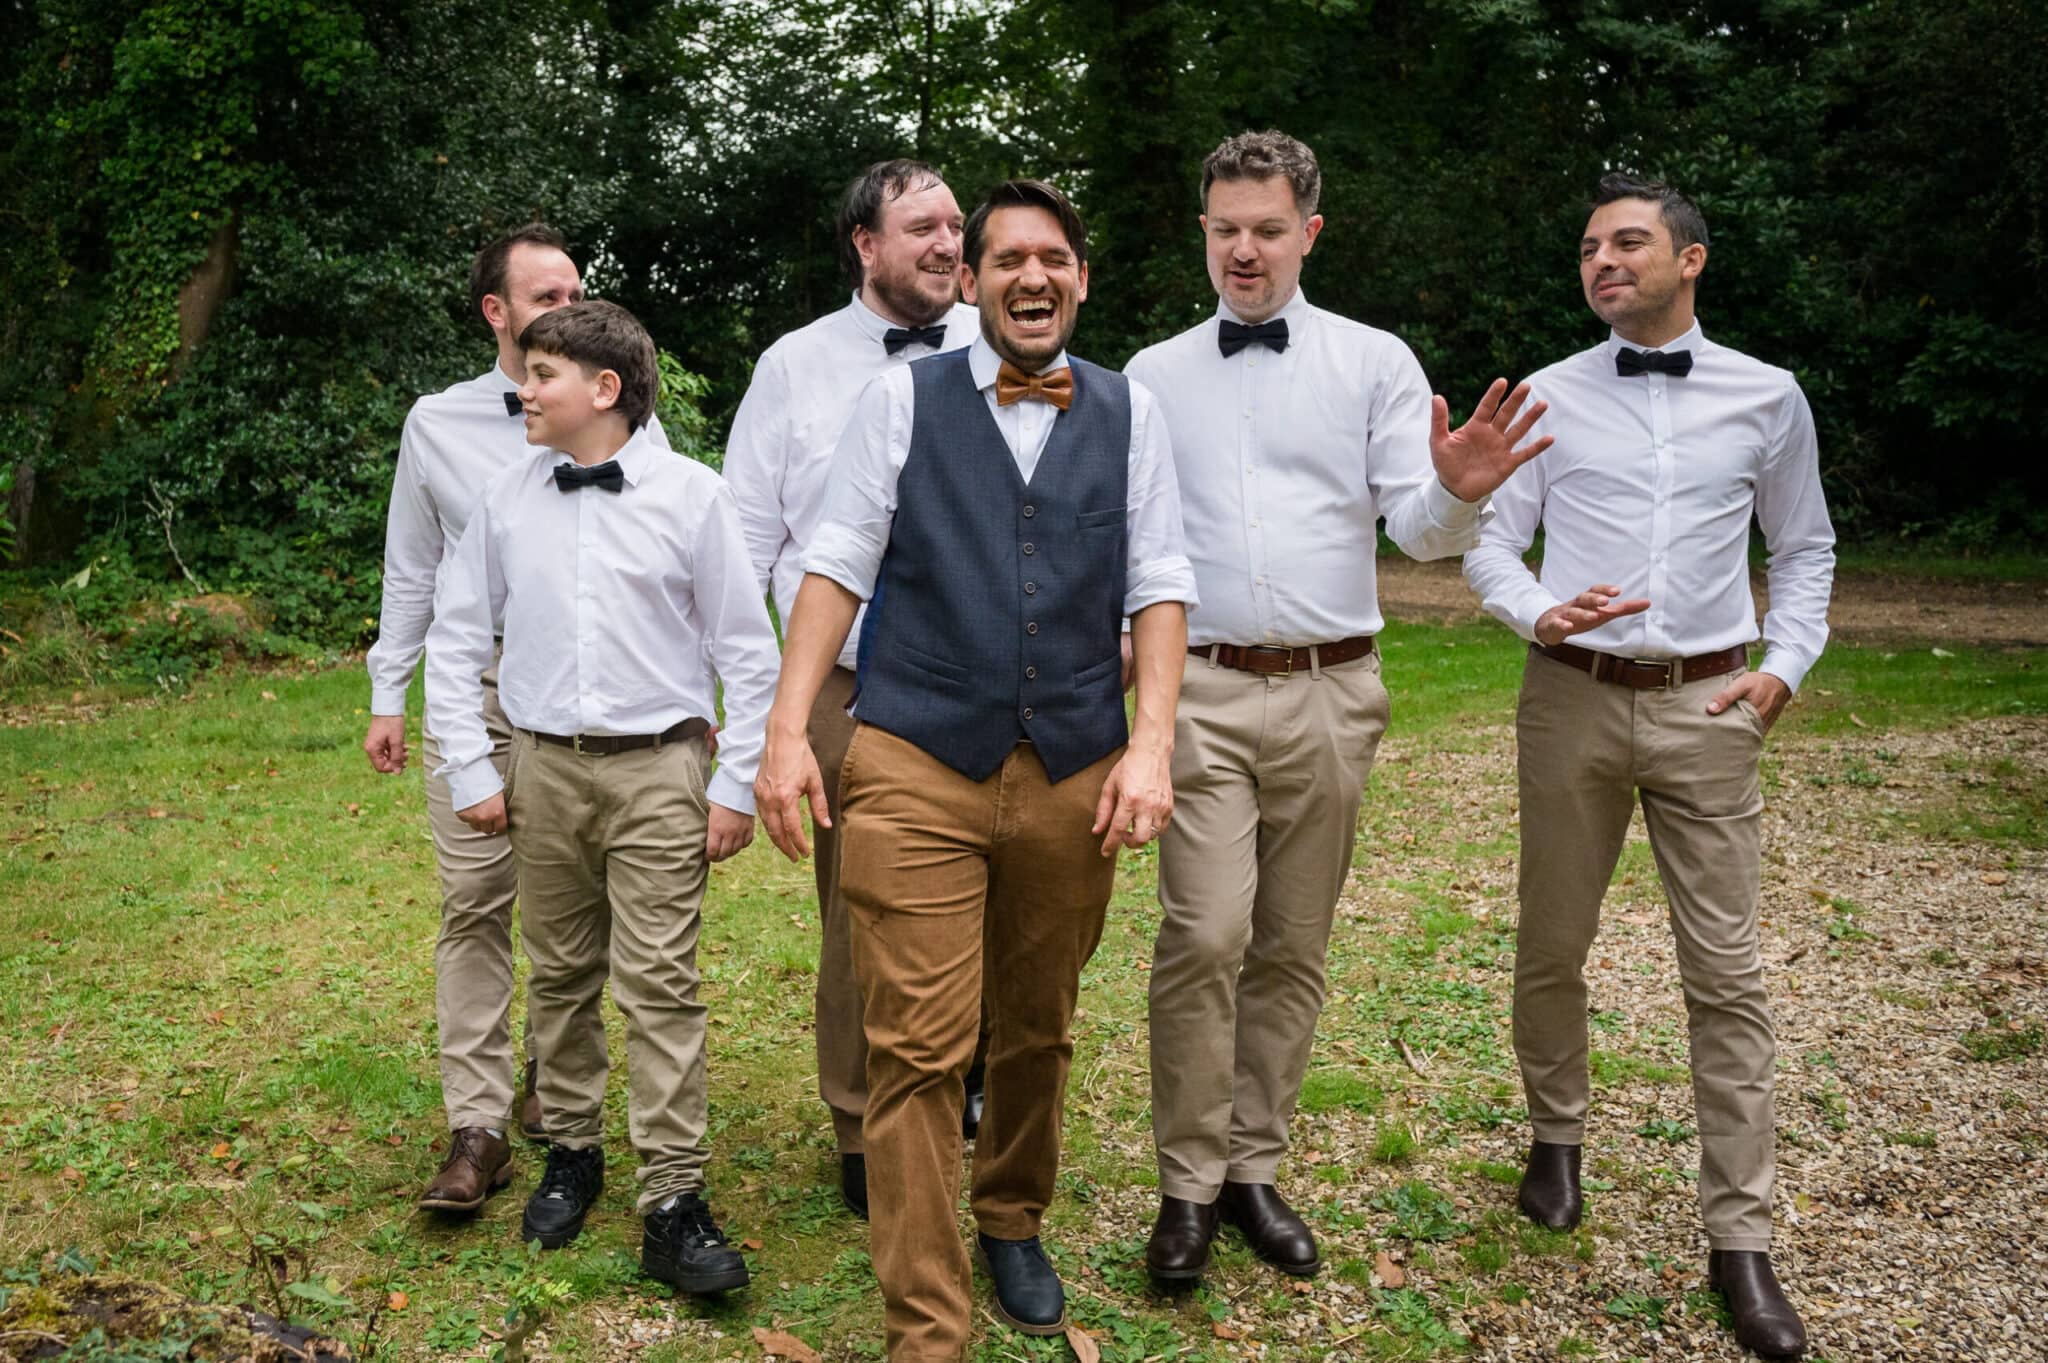 Natural shot of grooms party at Weddings in the Wood in Hampshire